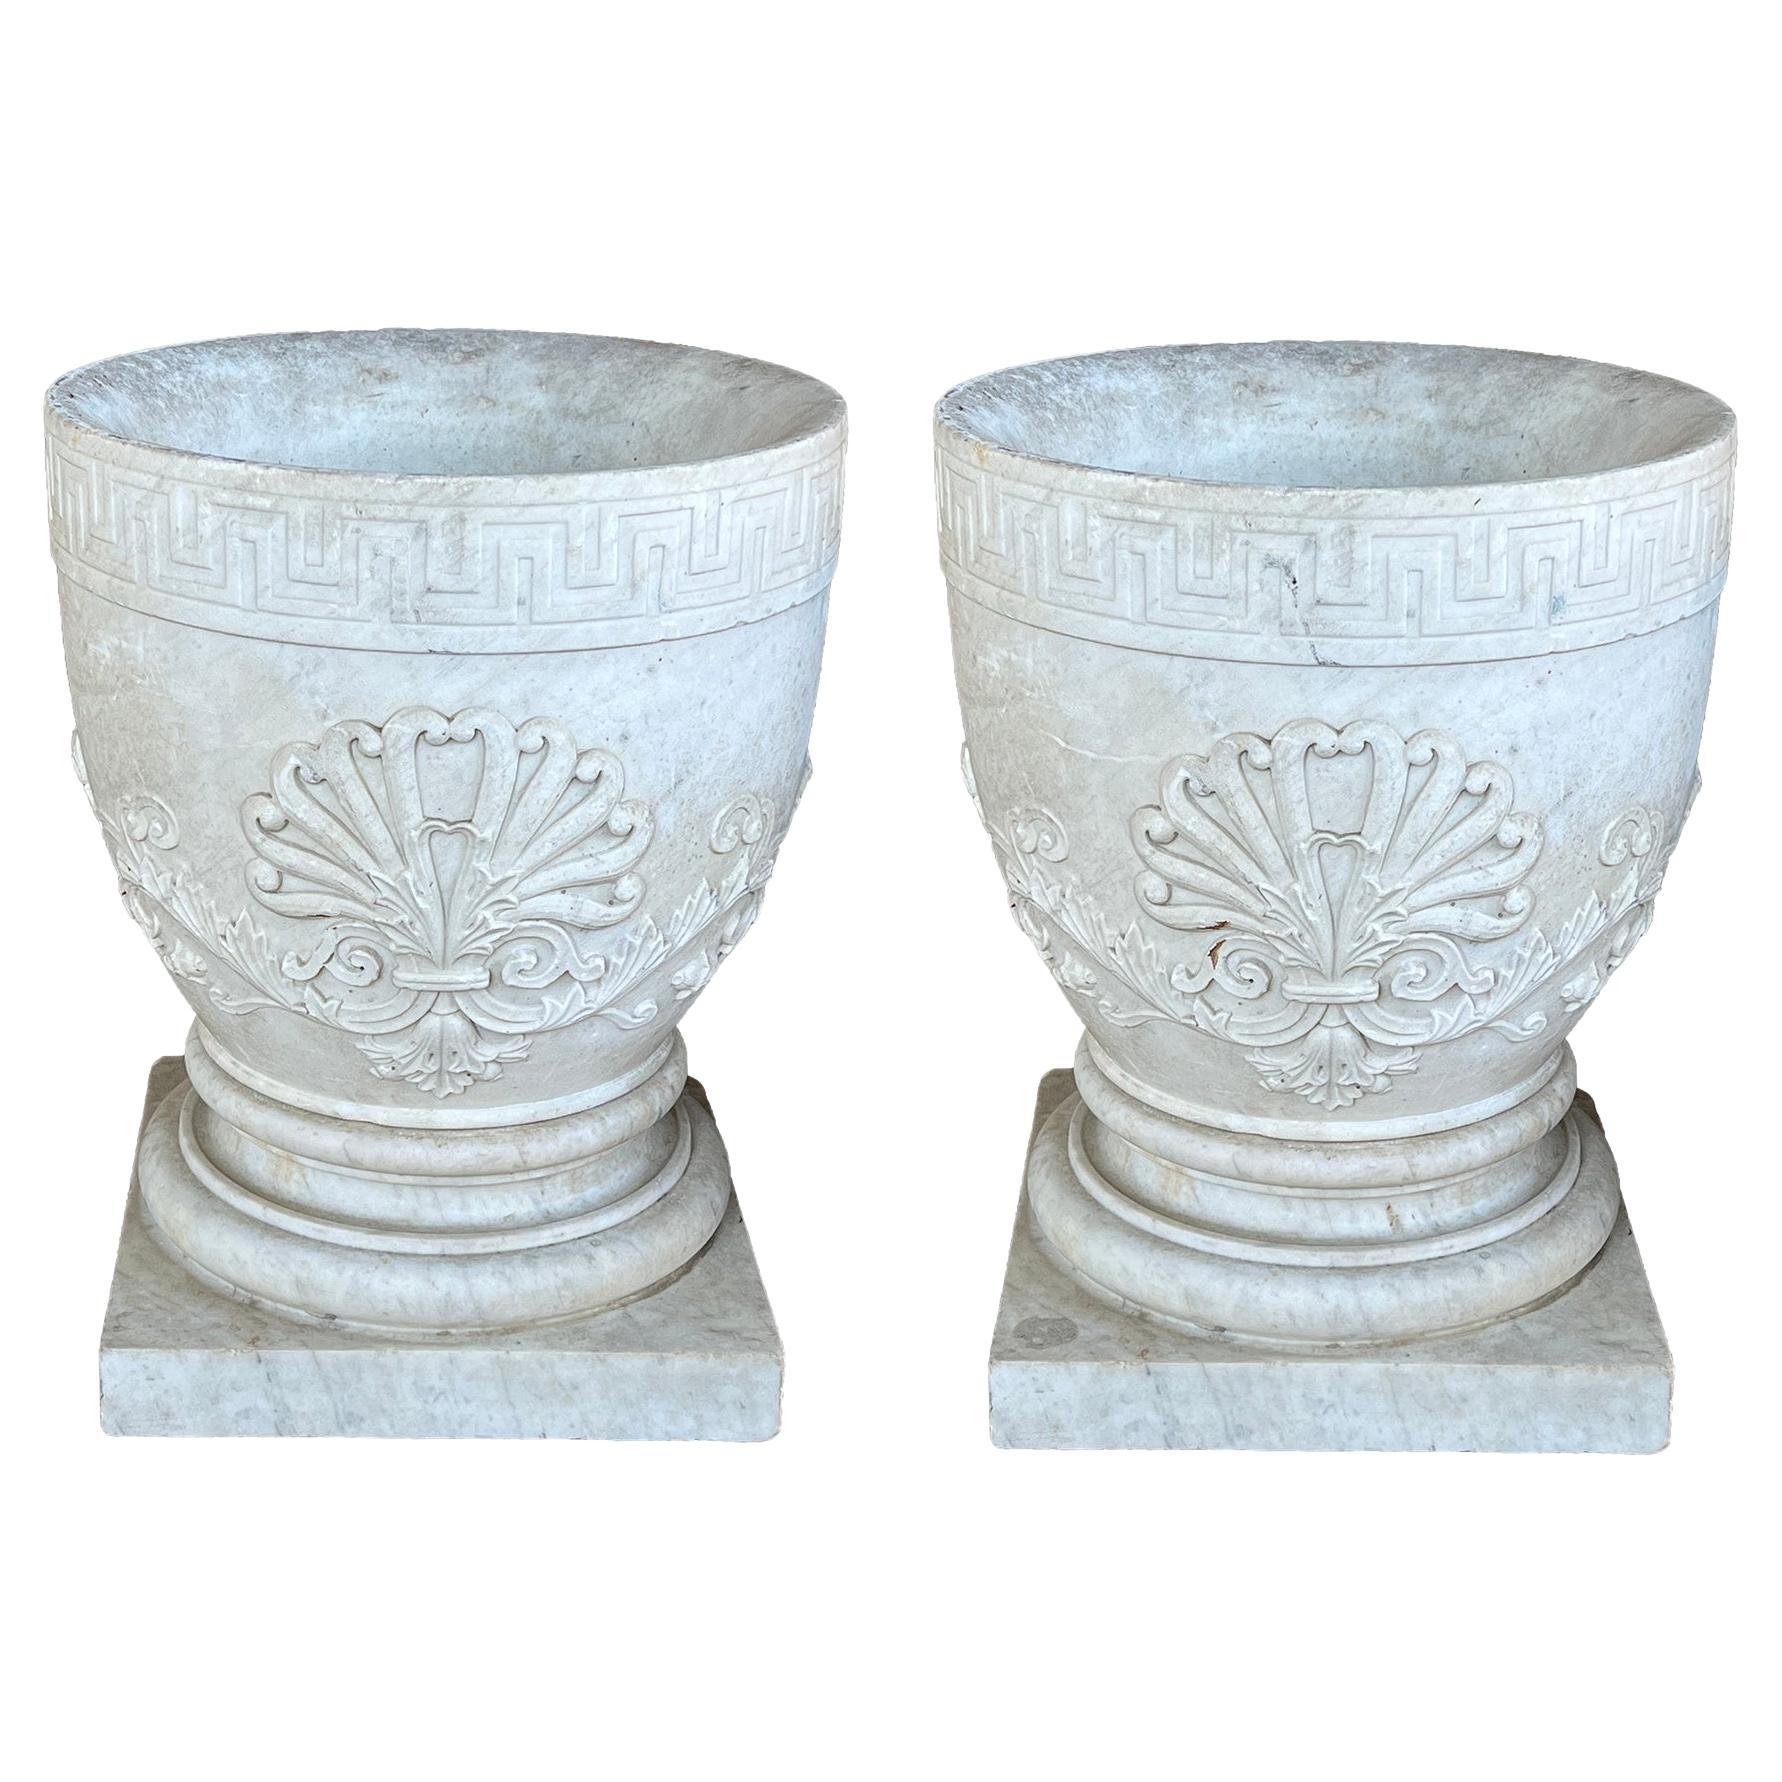 Pair of Italian Neoclassical Carved Urns with Anthemion Relief